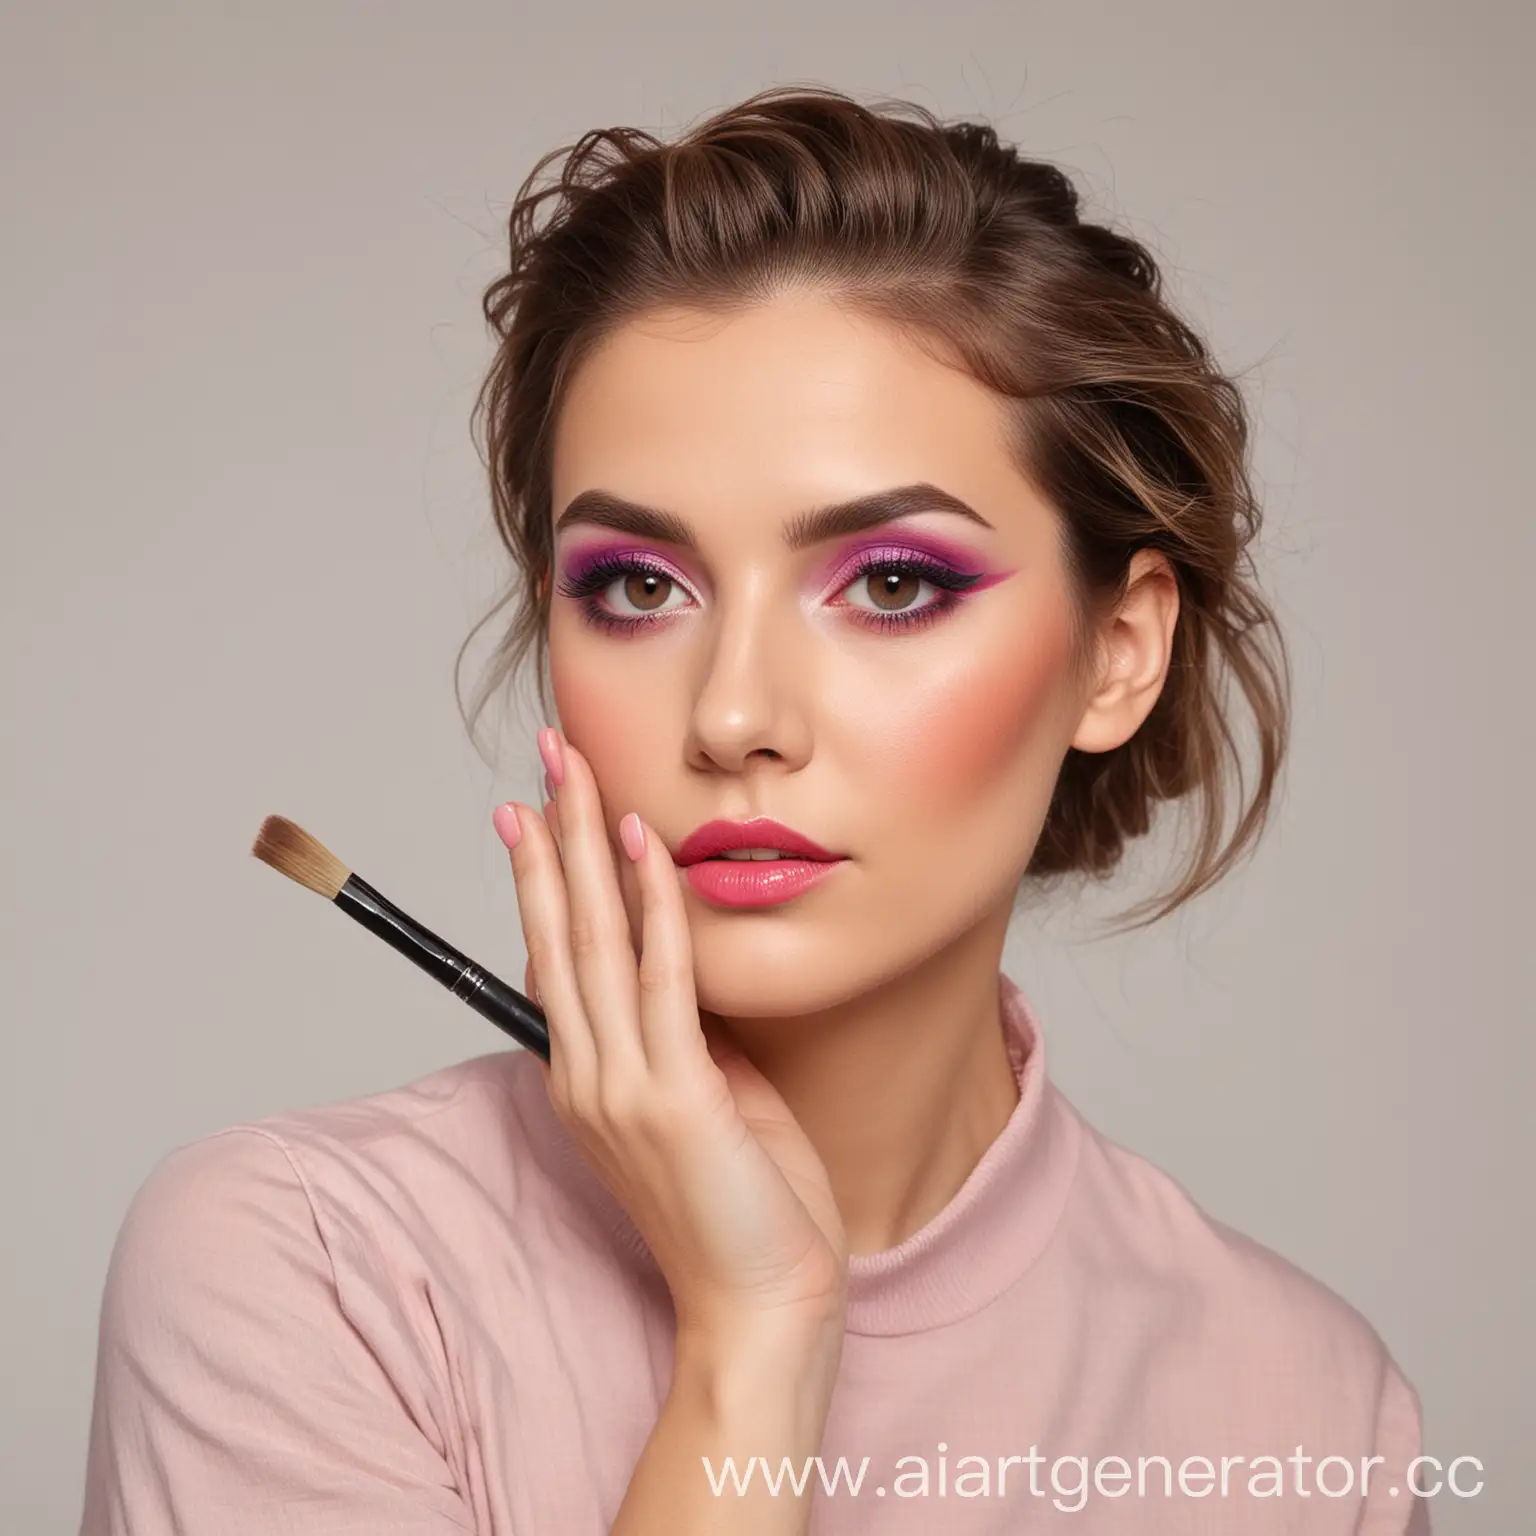 80s-Style-Makeup-Woman-Holding-Paintbrush